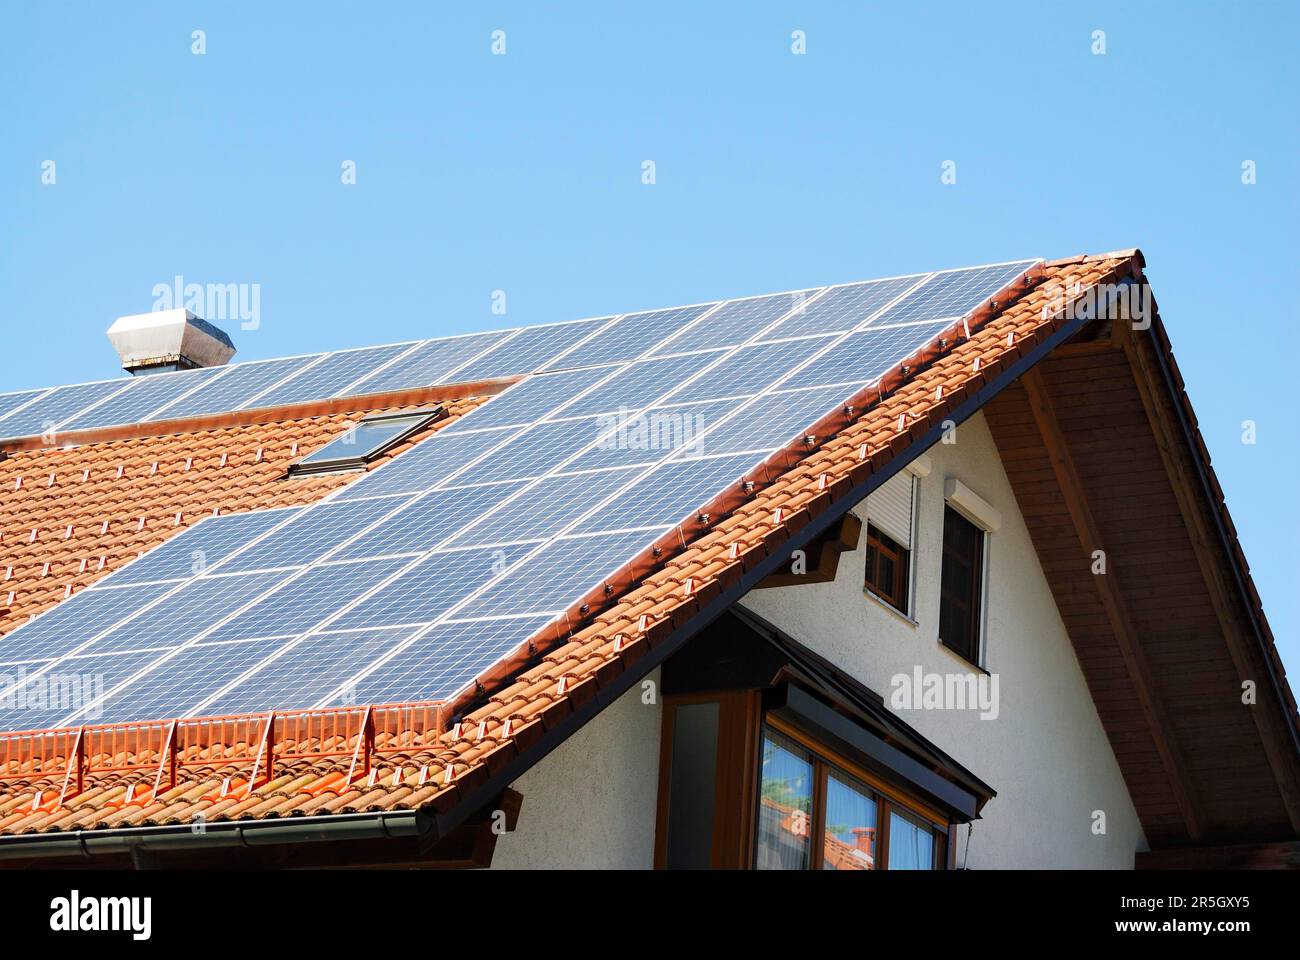 Photovoltaic on the roof of a house Stock Photo